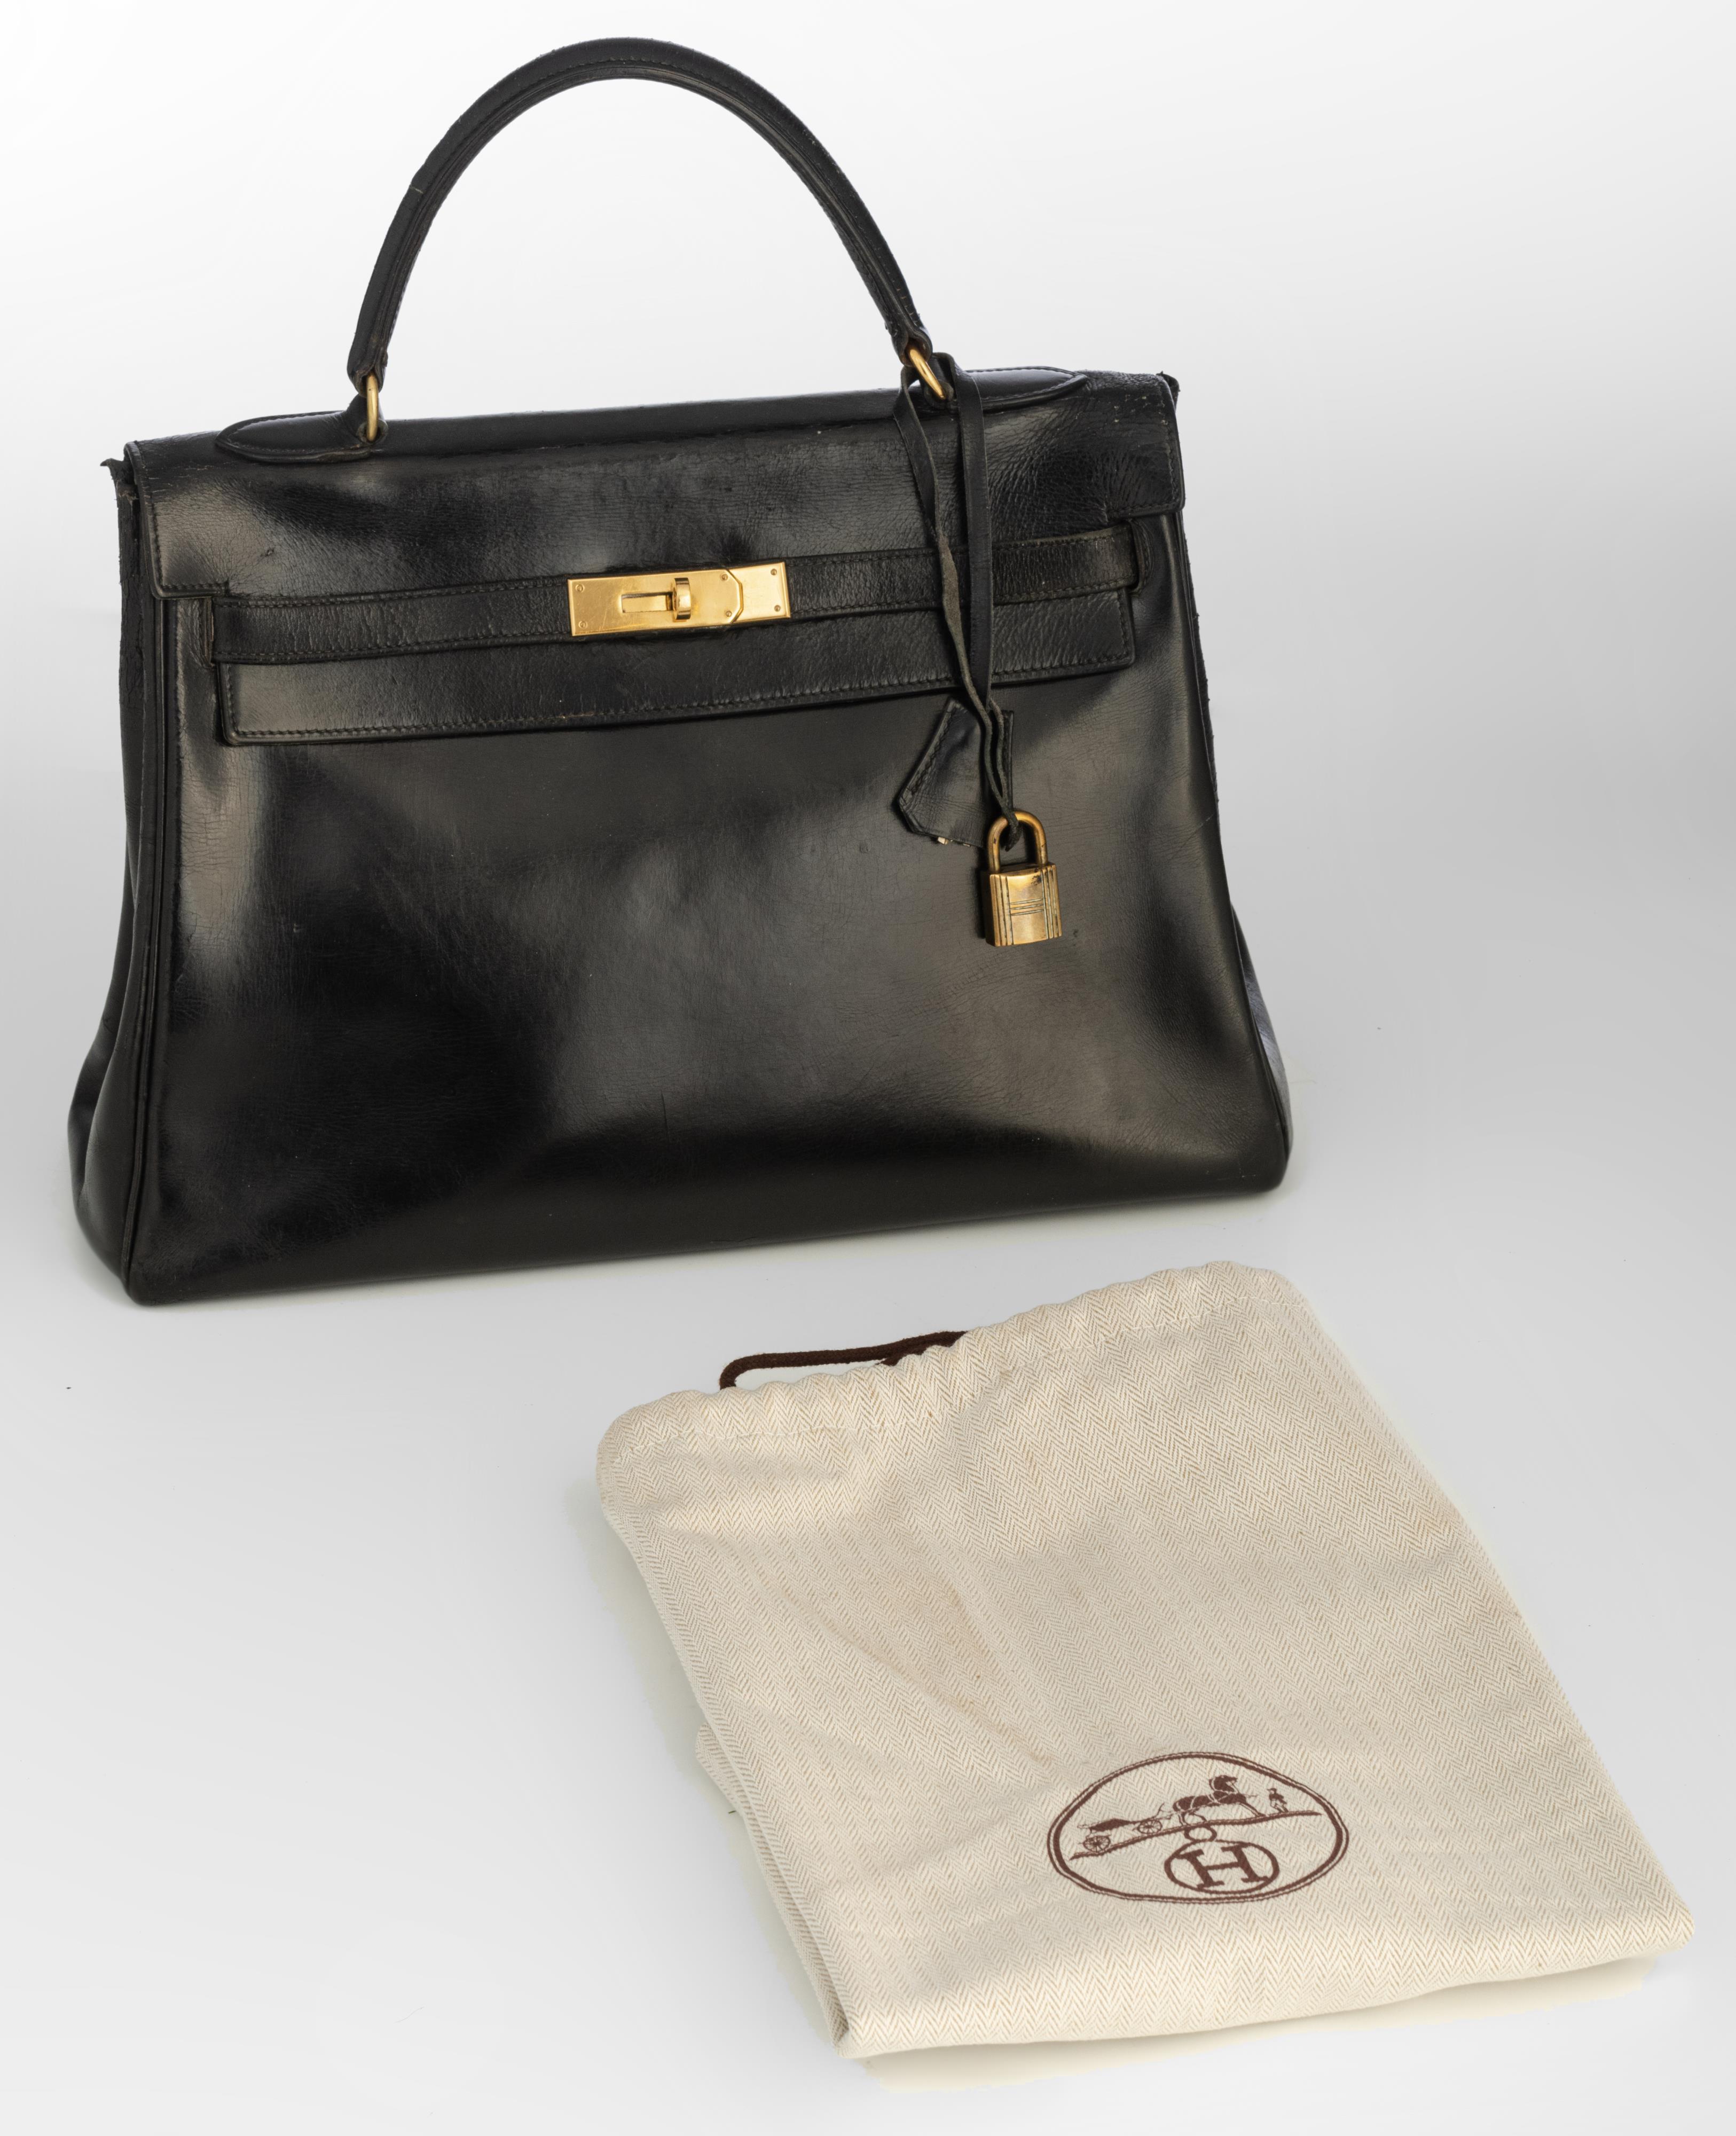 HERMÈS, Kelly Sellier 32 bag, Black box calf leather, with gilt metal hardware - Image 7 of 19